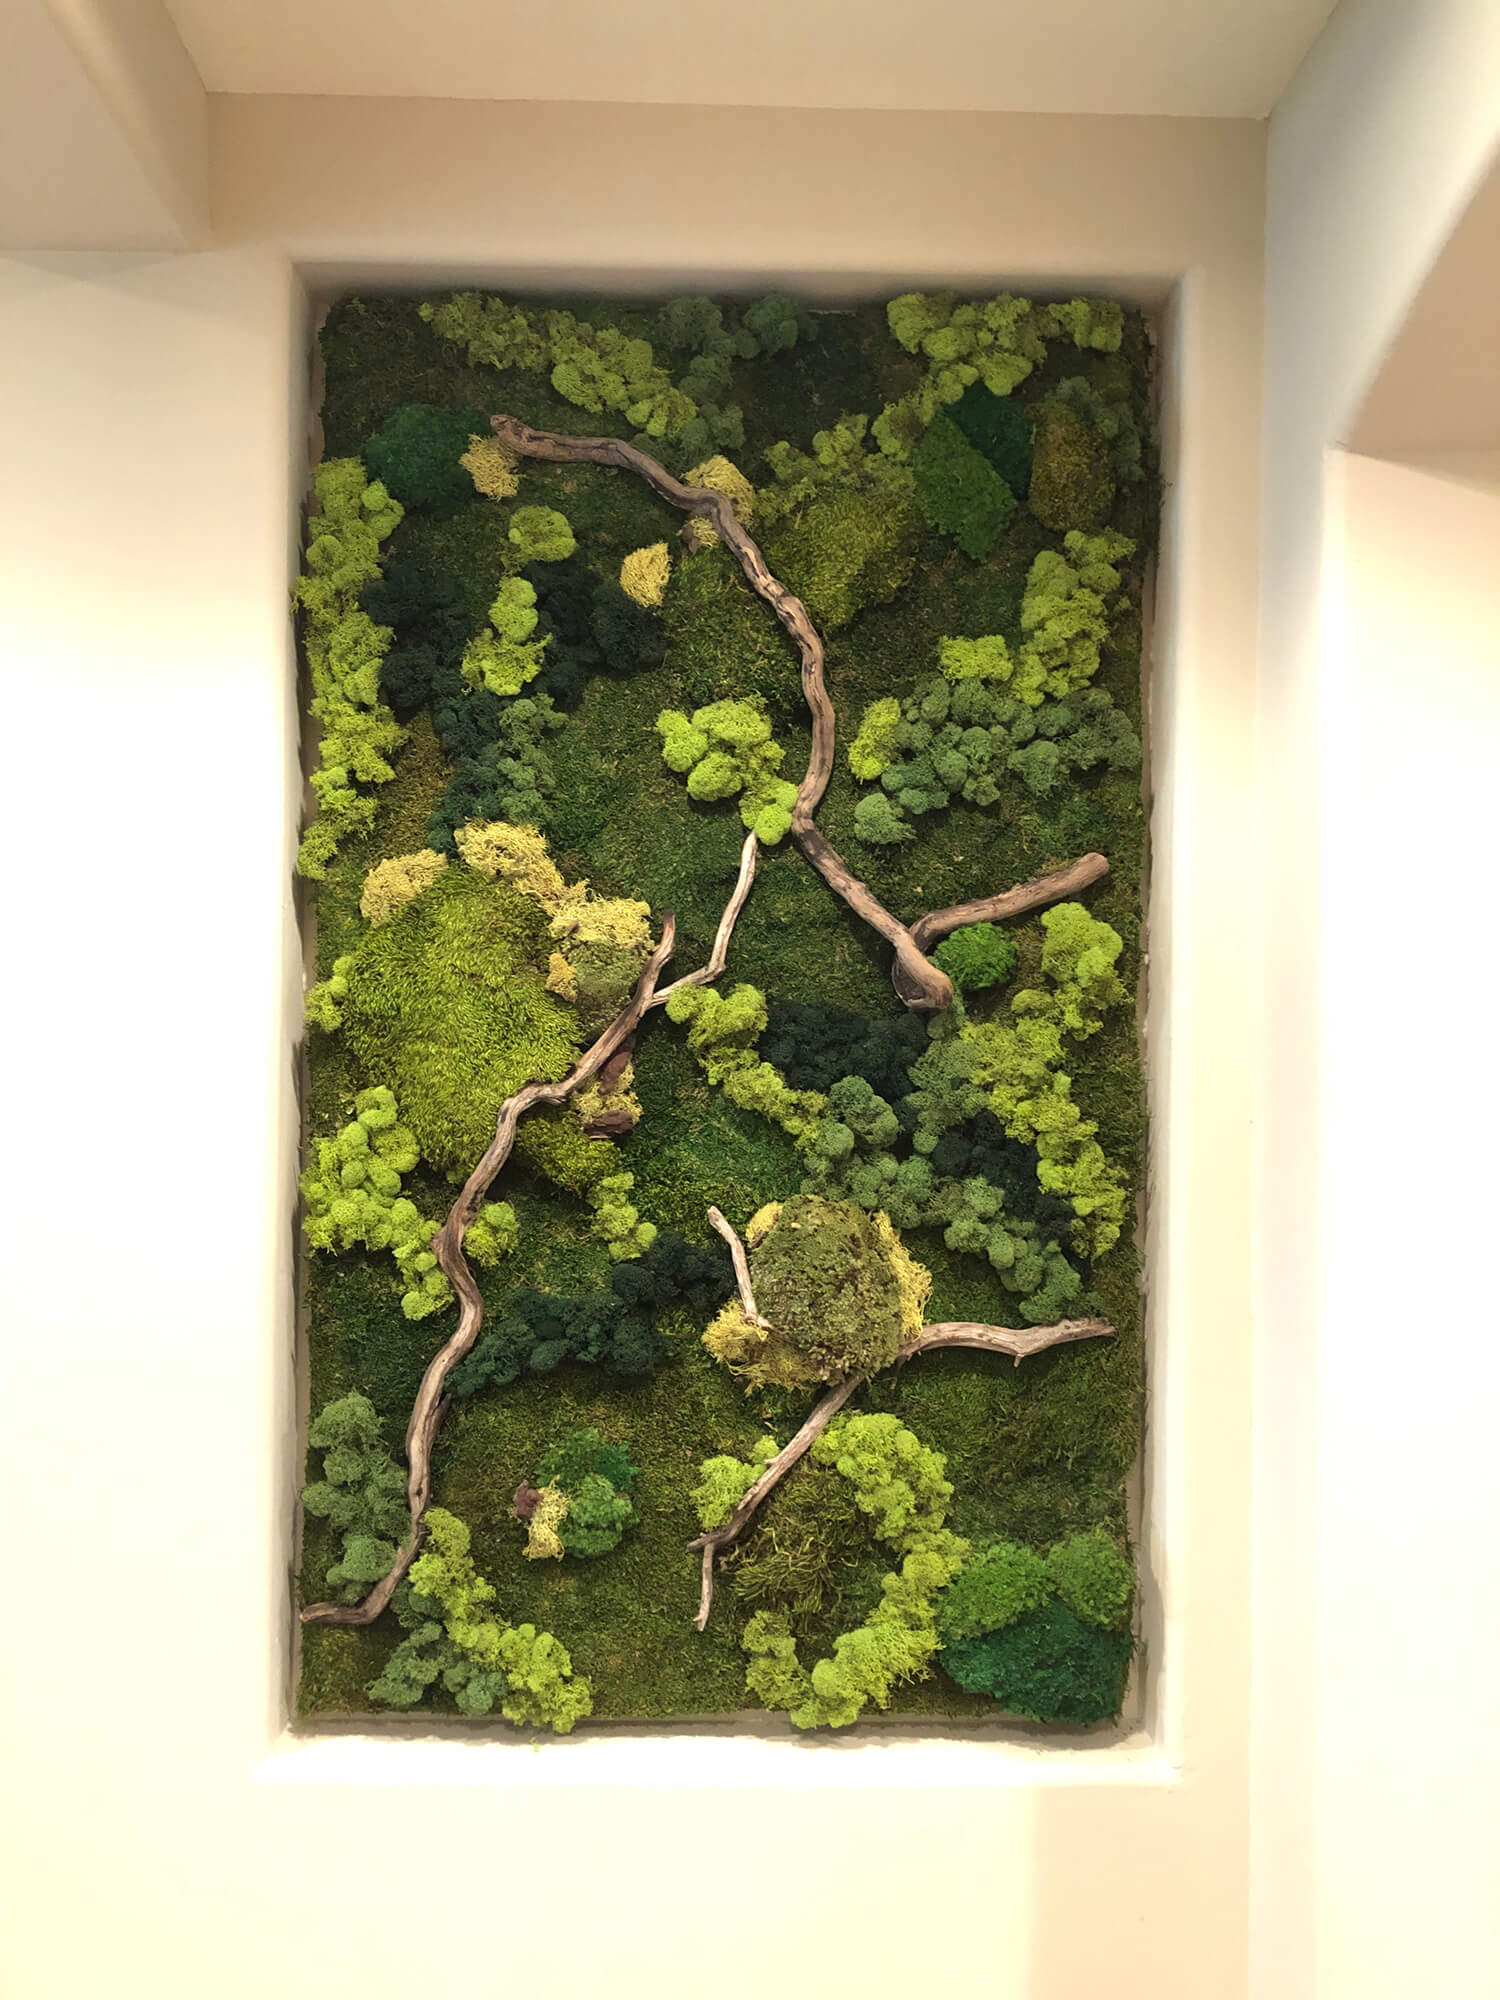 vertical wall garden created from various preserved moss intertwined with driftwood